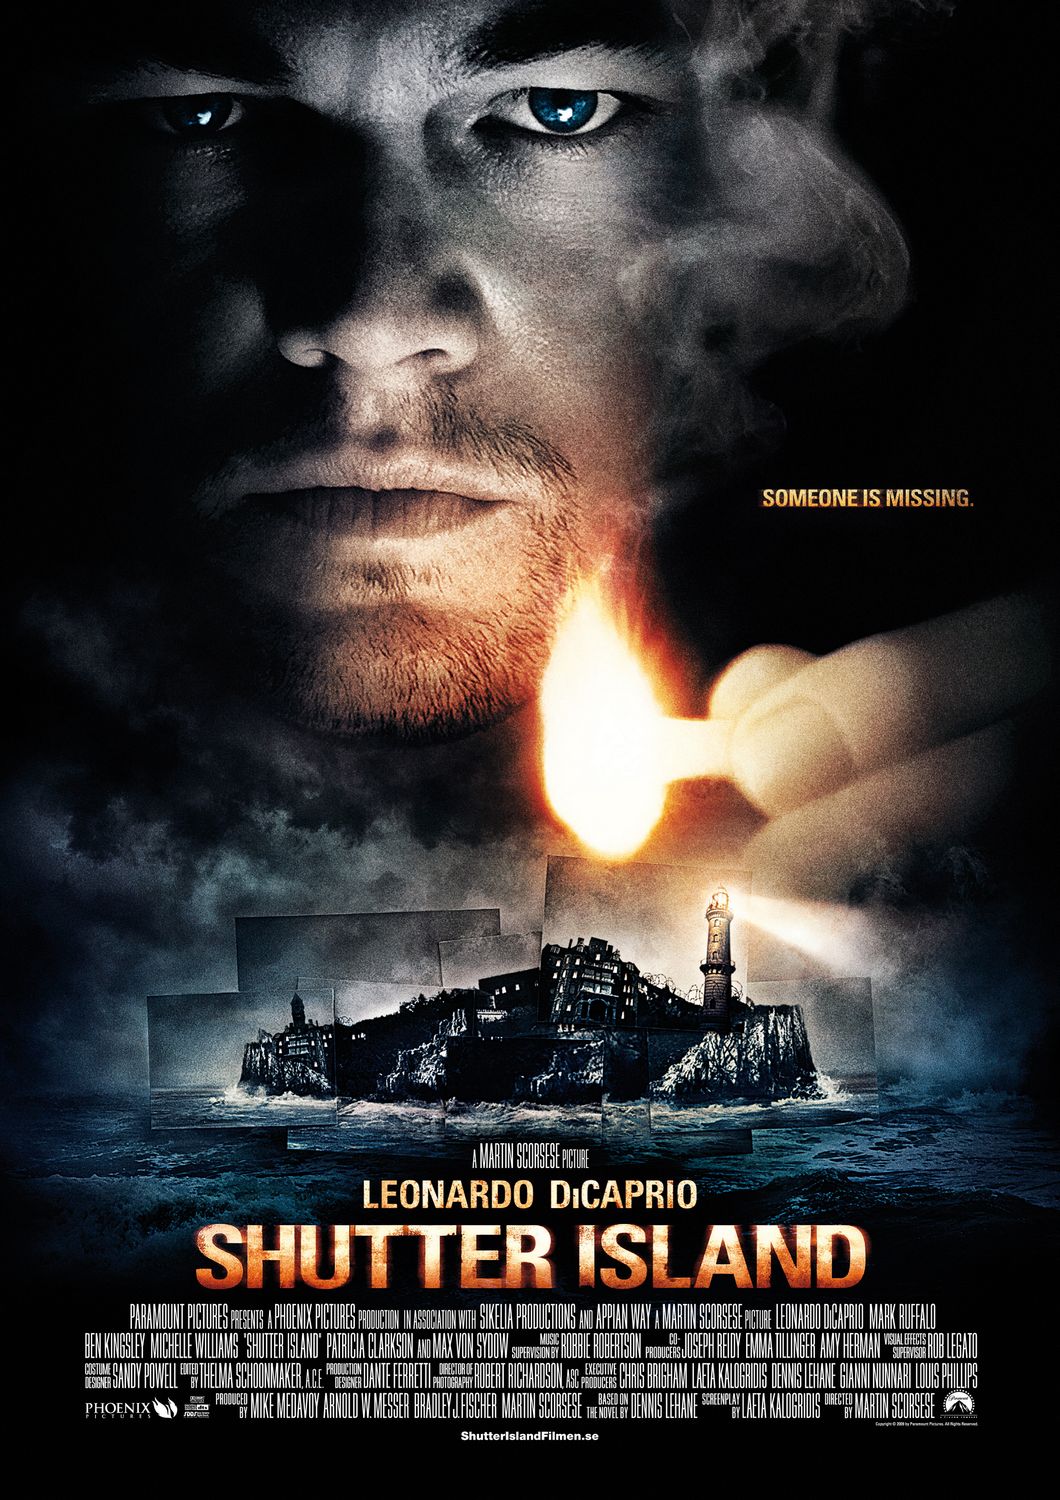 Return to Main Page for Shutter Island Posters